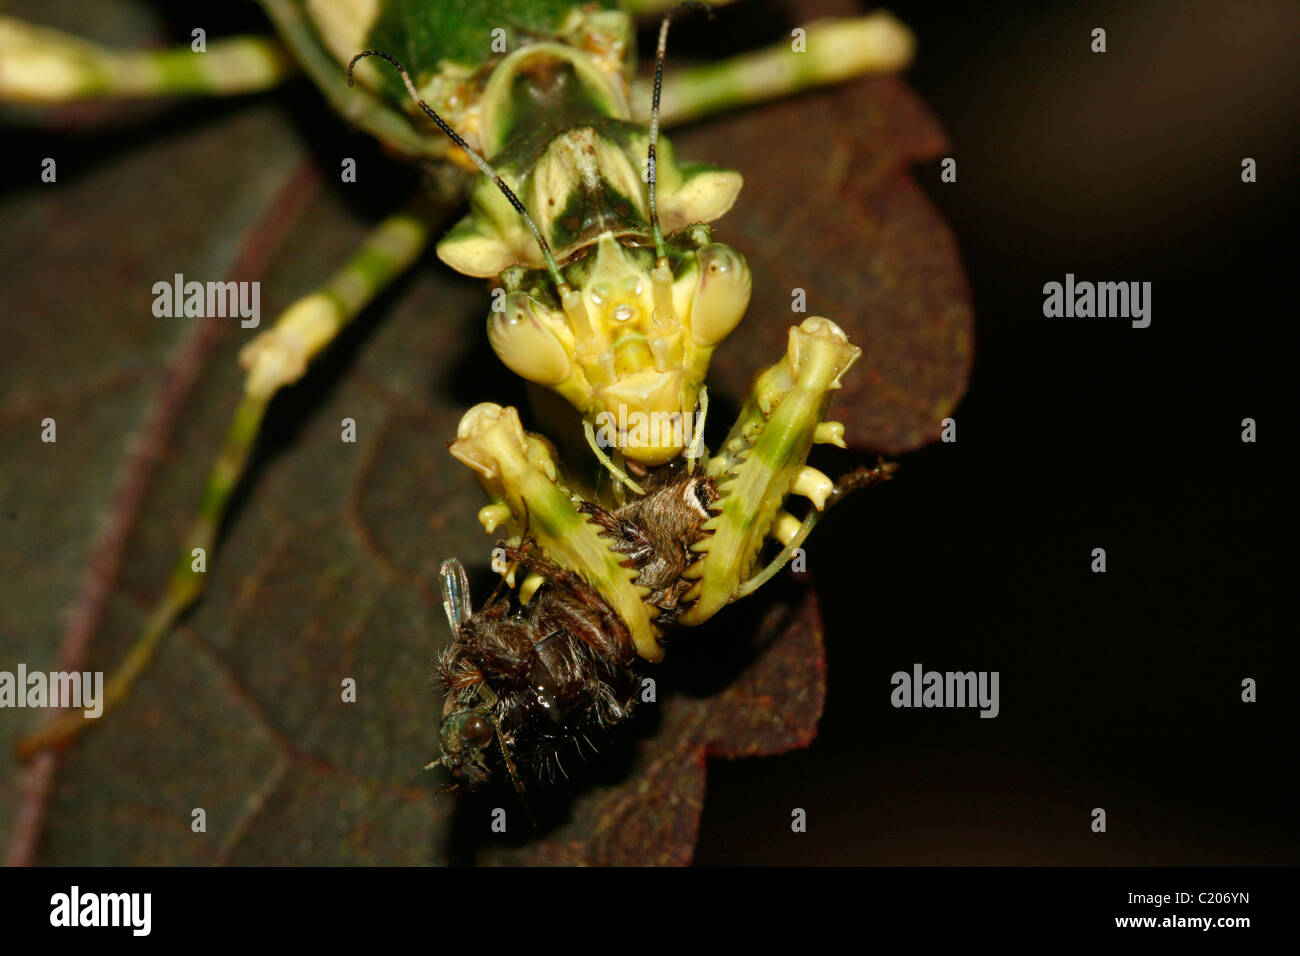 A praying mantis (Spiny Flower Mantis, Pseudocreobotra wahlbergii) eating a spider Stock Photo